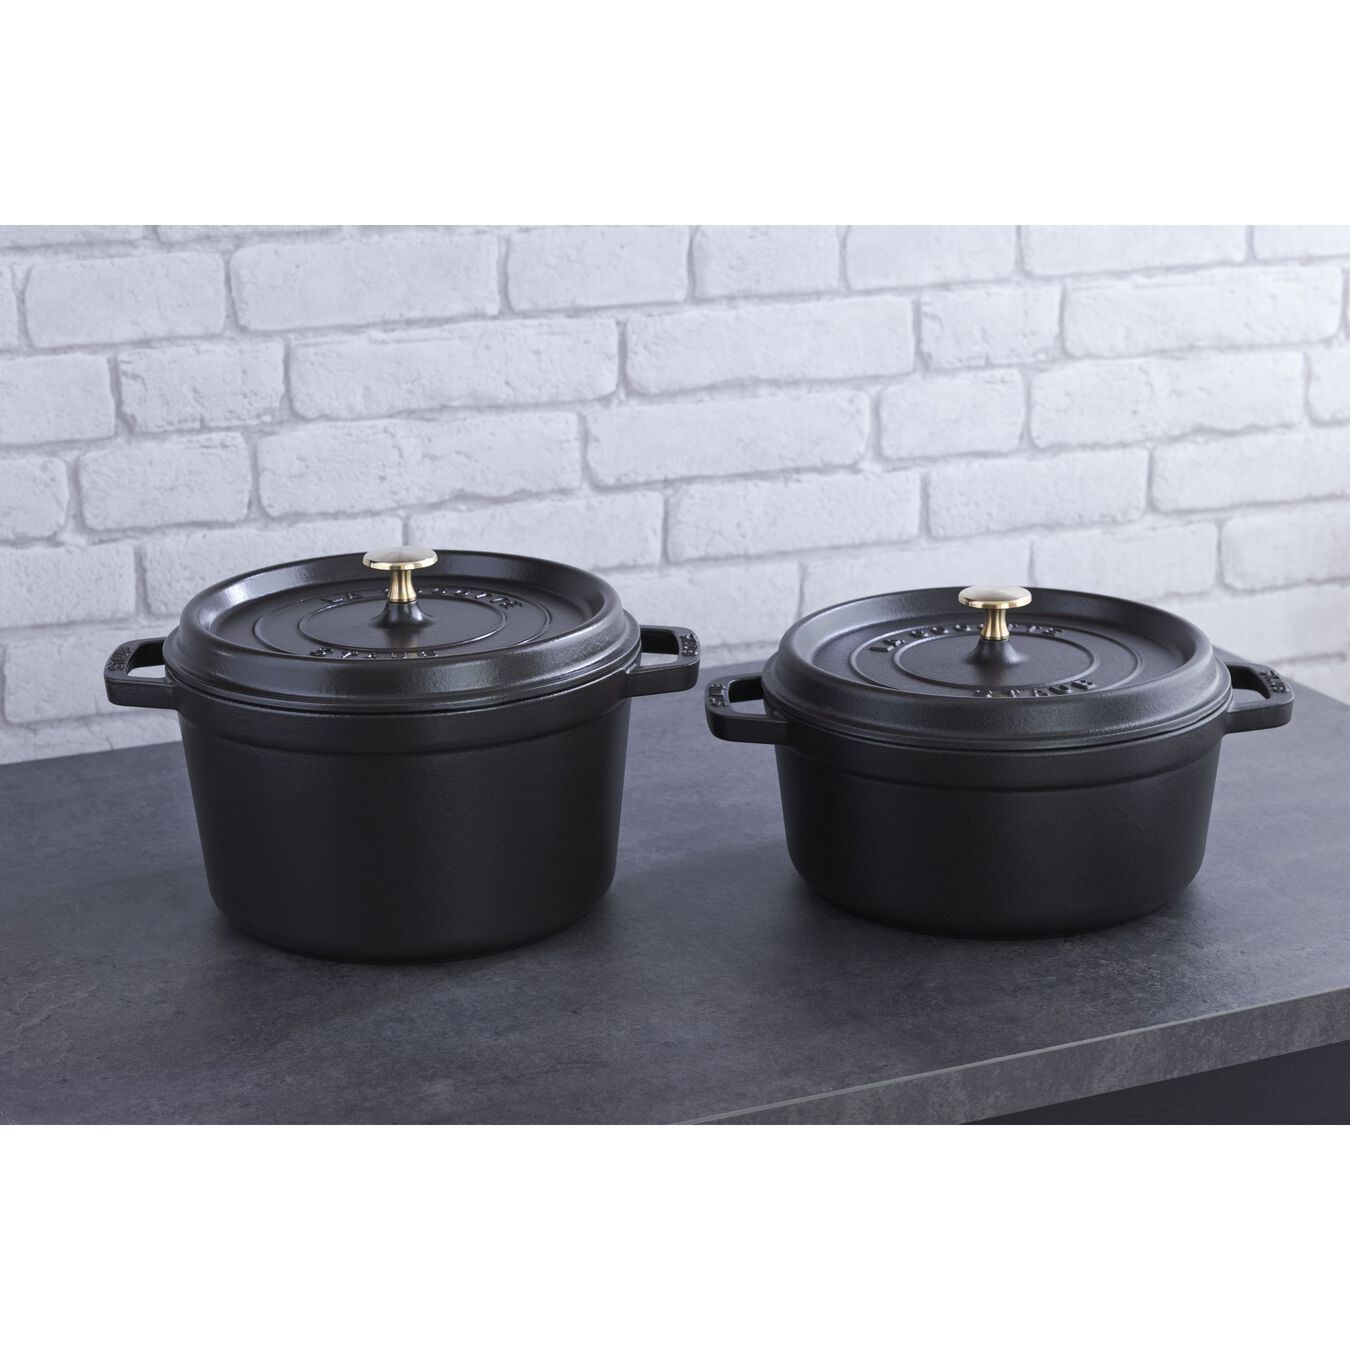 4.75 l cast iron round Tall cocotte, black - Visual Imperfections,,large 9